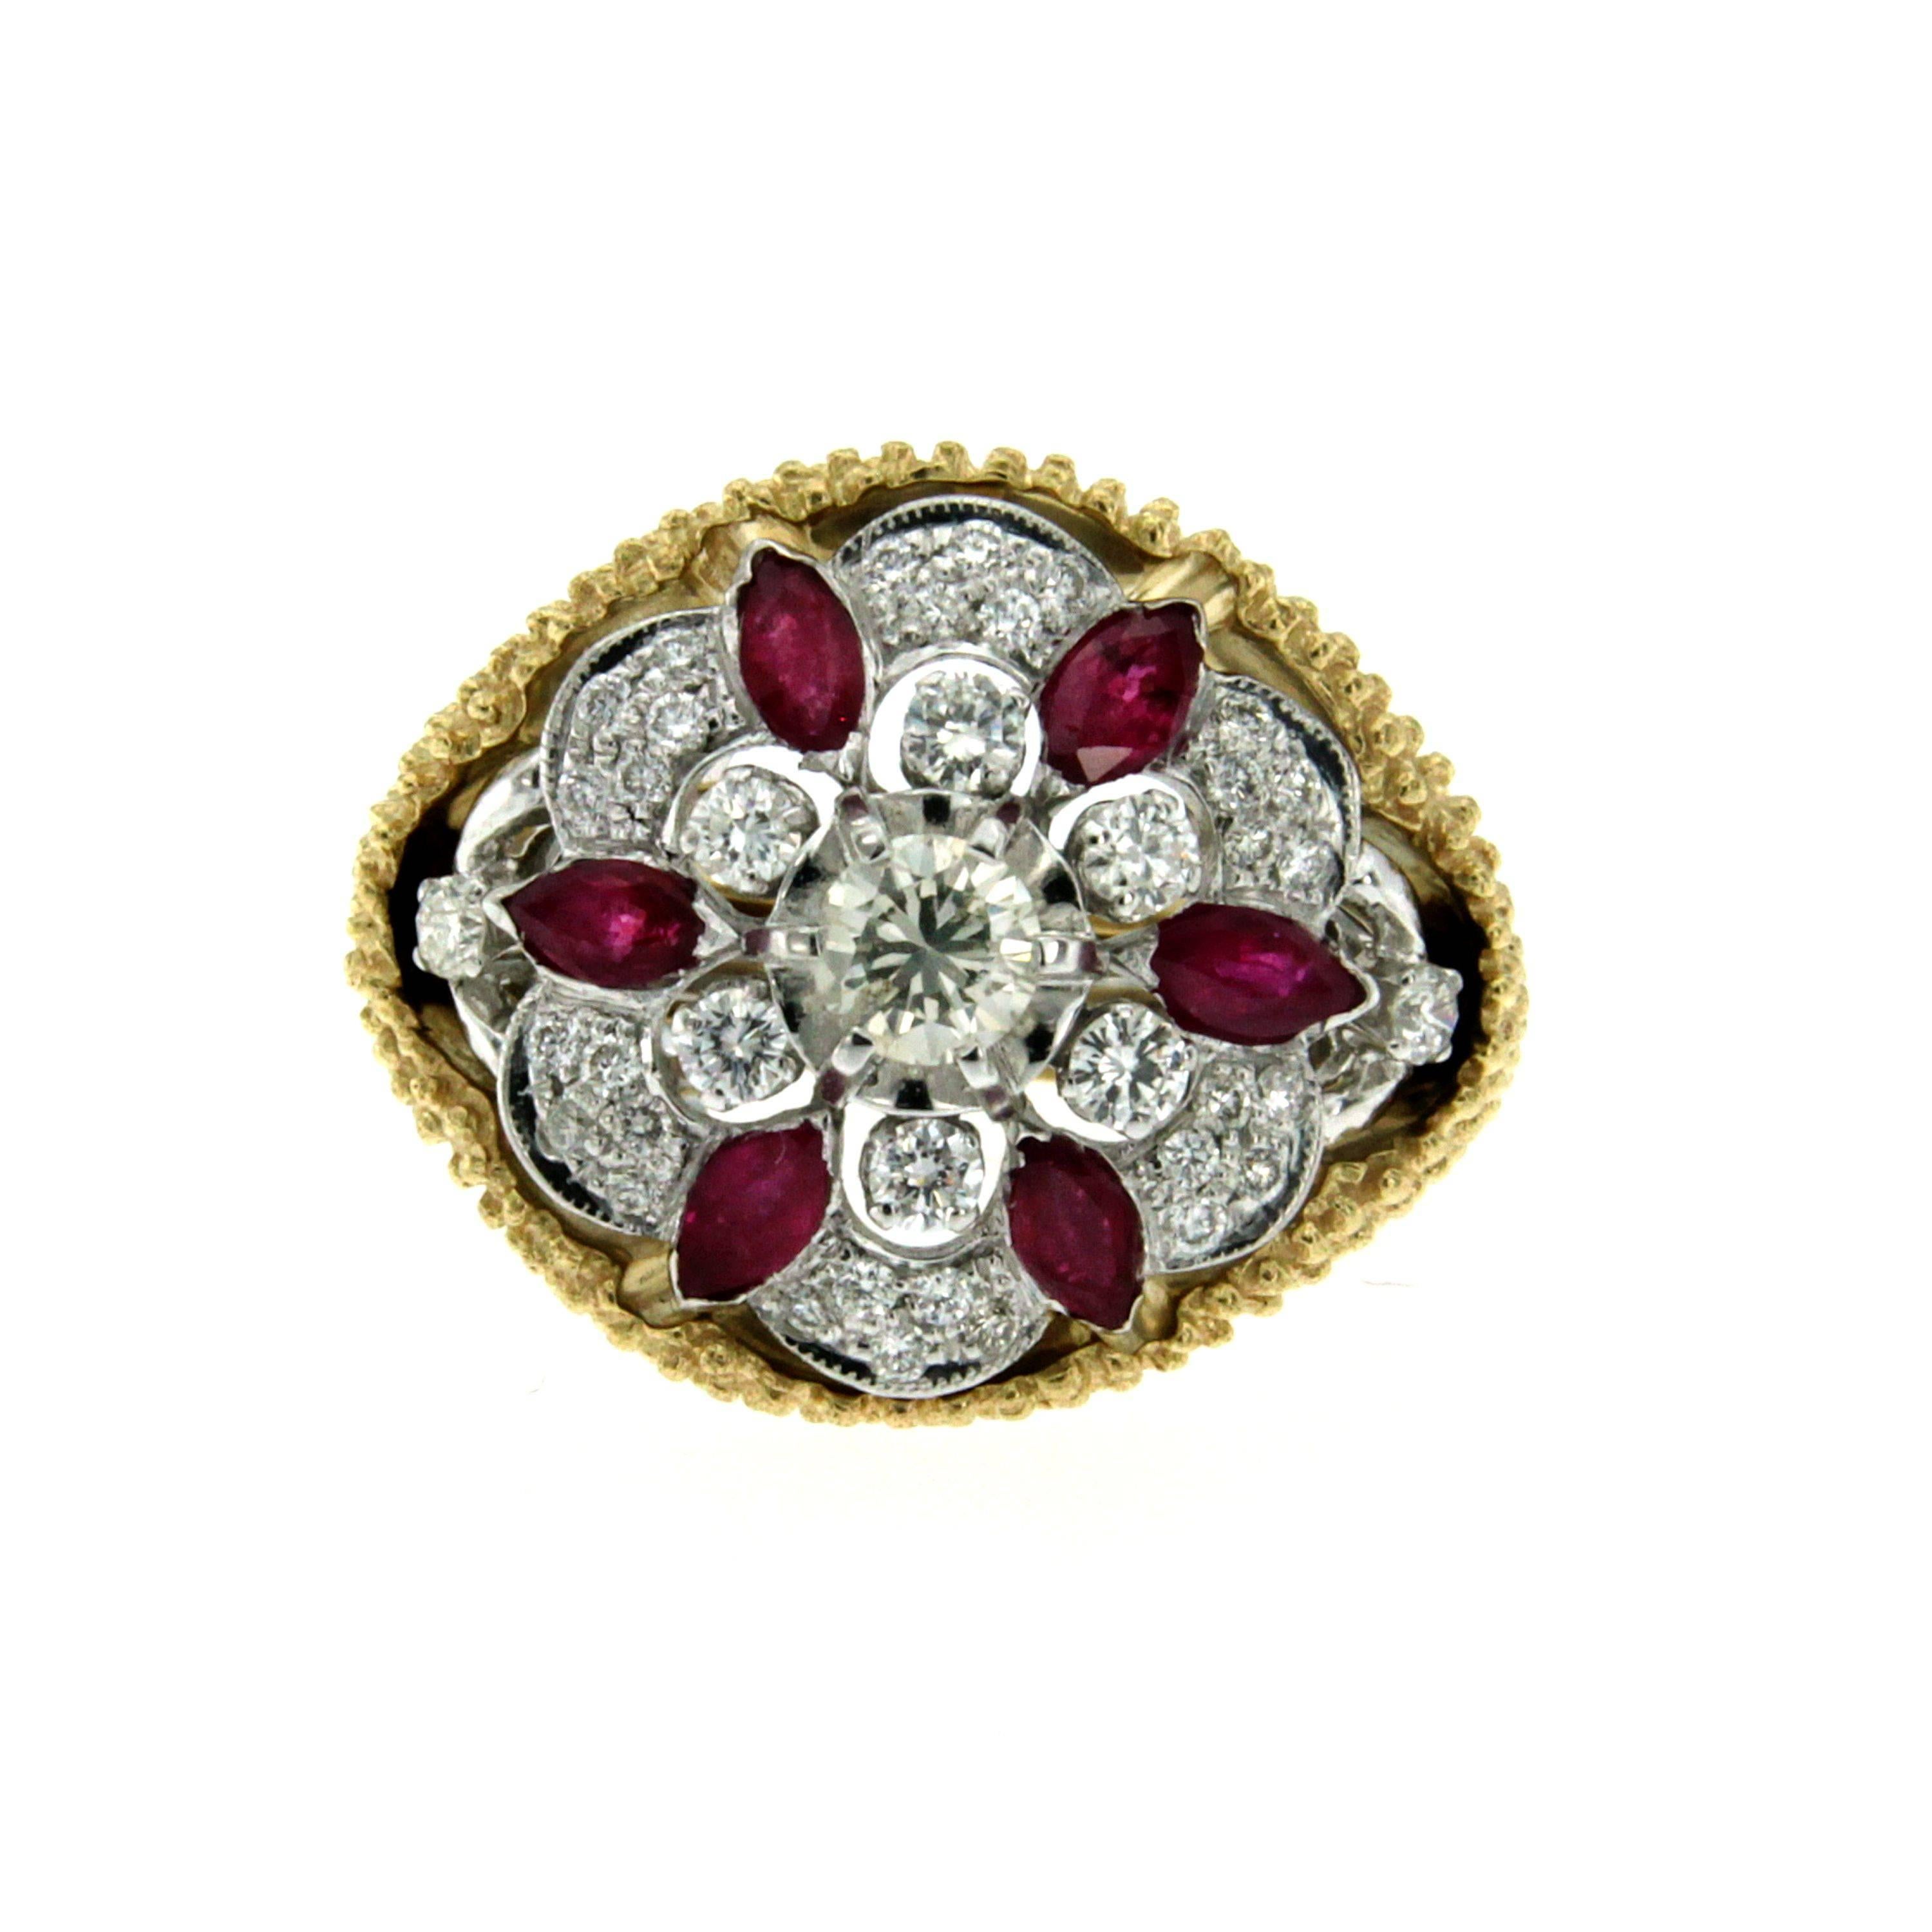 A master-crafted detachable 18k Gold ring composed of round brilliant cut Diamonds weighing approx. 0.90 ct  graded color F-G clarity Vs and navette cut Rubies of approx. 0.95 total carats.
The ring features a detachable yellow Gold frame. Circa